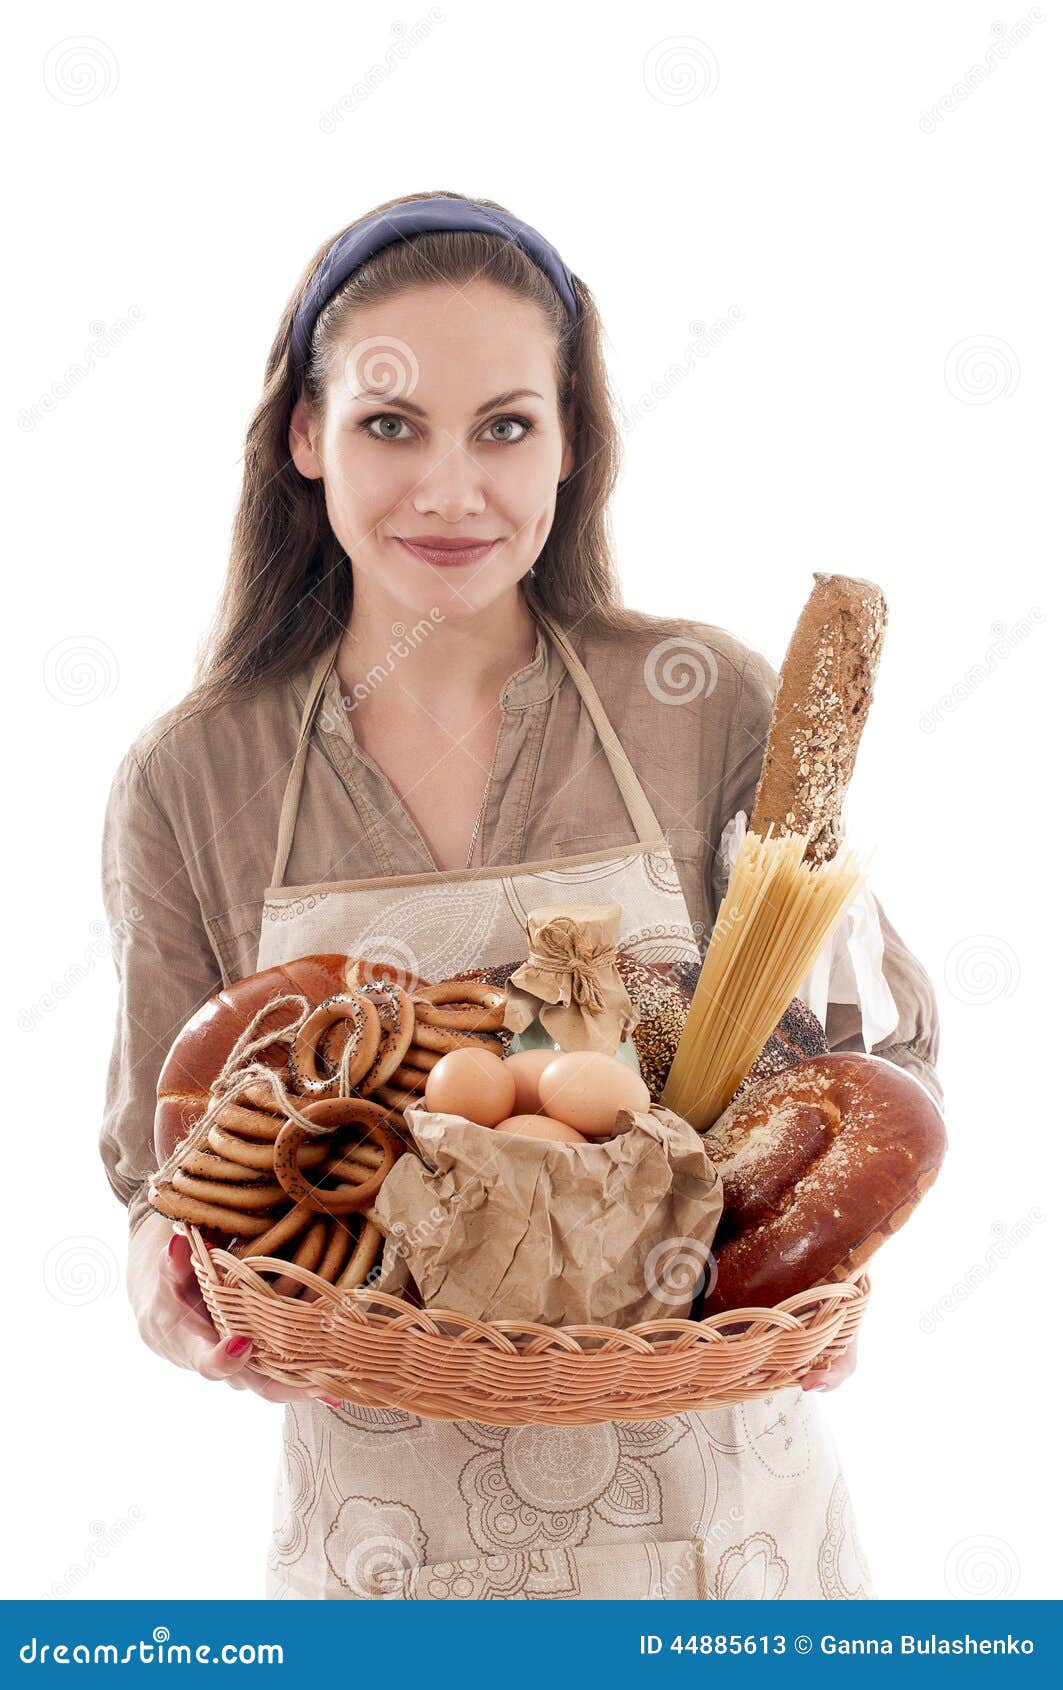 Housewife Holding A Wicker Tray With Bread Products Stock Image Image Of Pasta Beautiful 